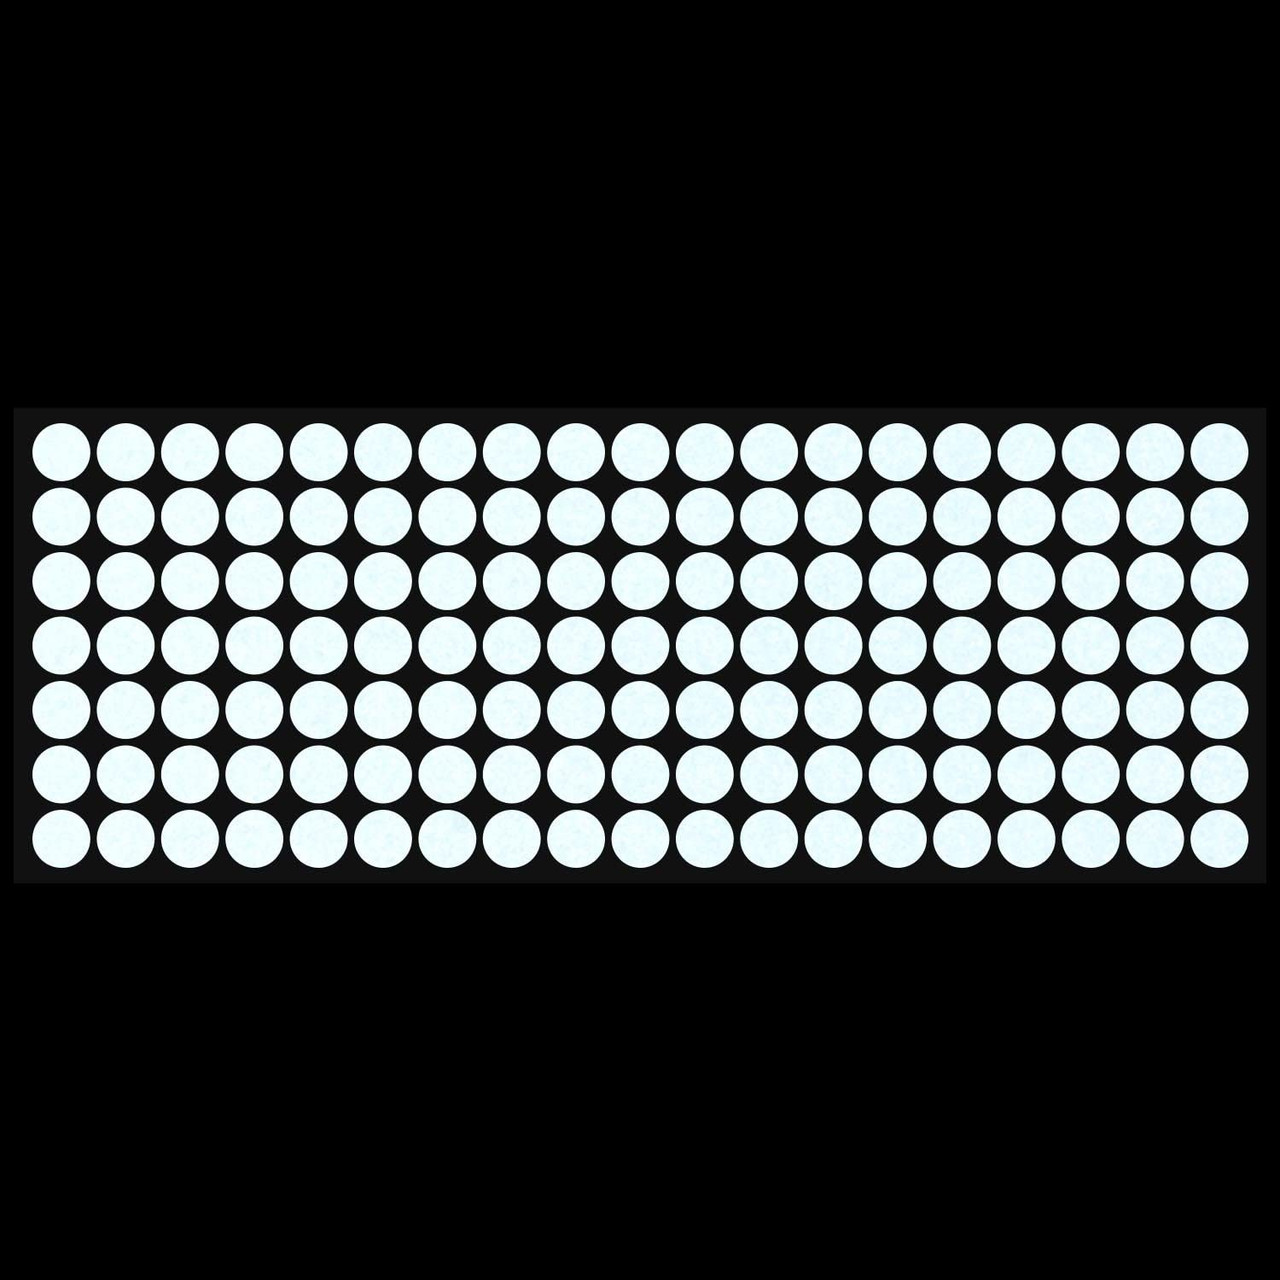 LiteMark Reflective 0.5 Inch Dot Sticker Decals for Helmets, Bicycles,  Strollers, Wheelchairs and More - Pack of 133